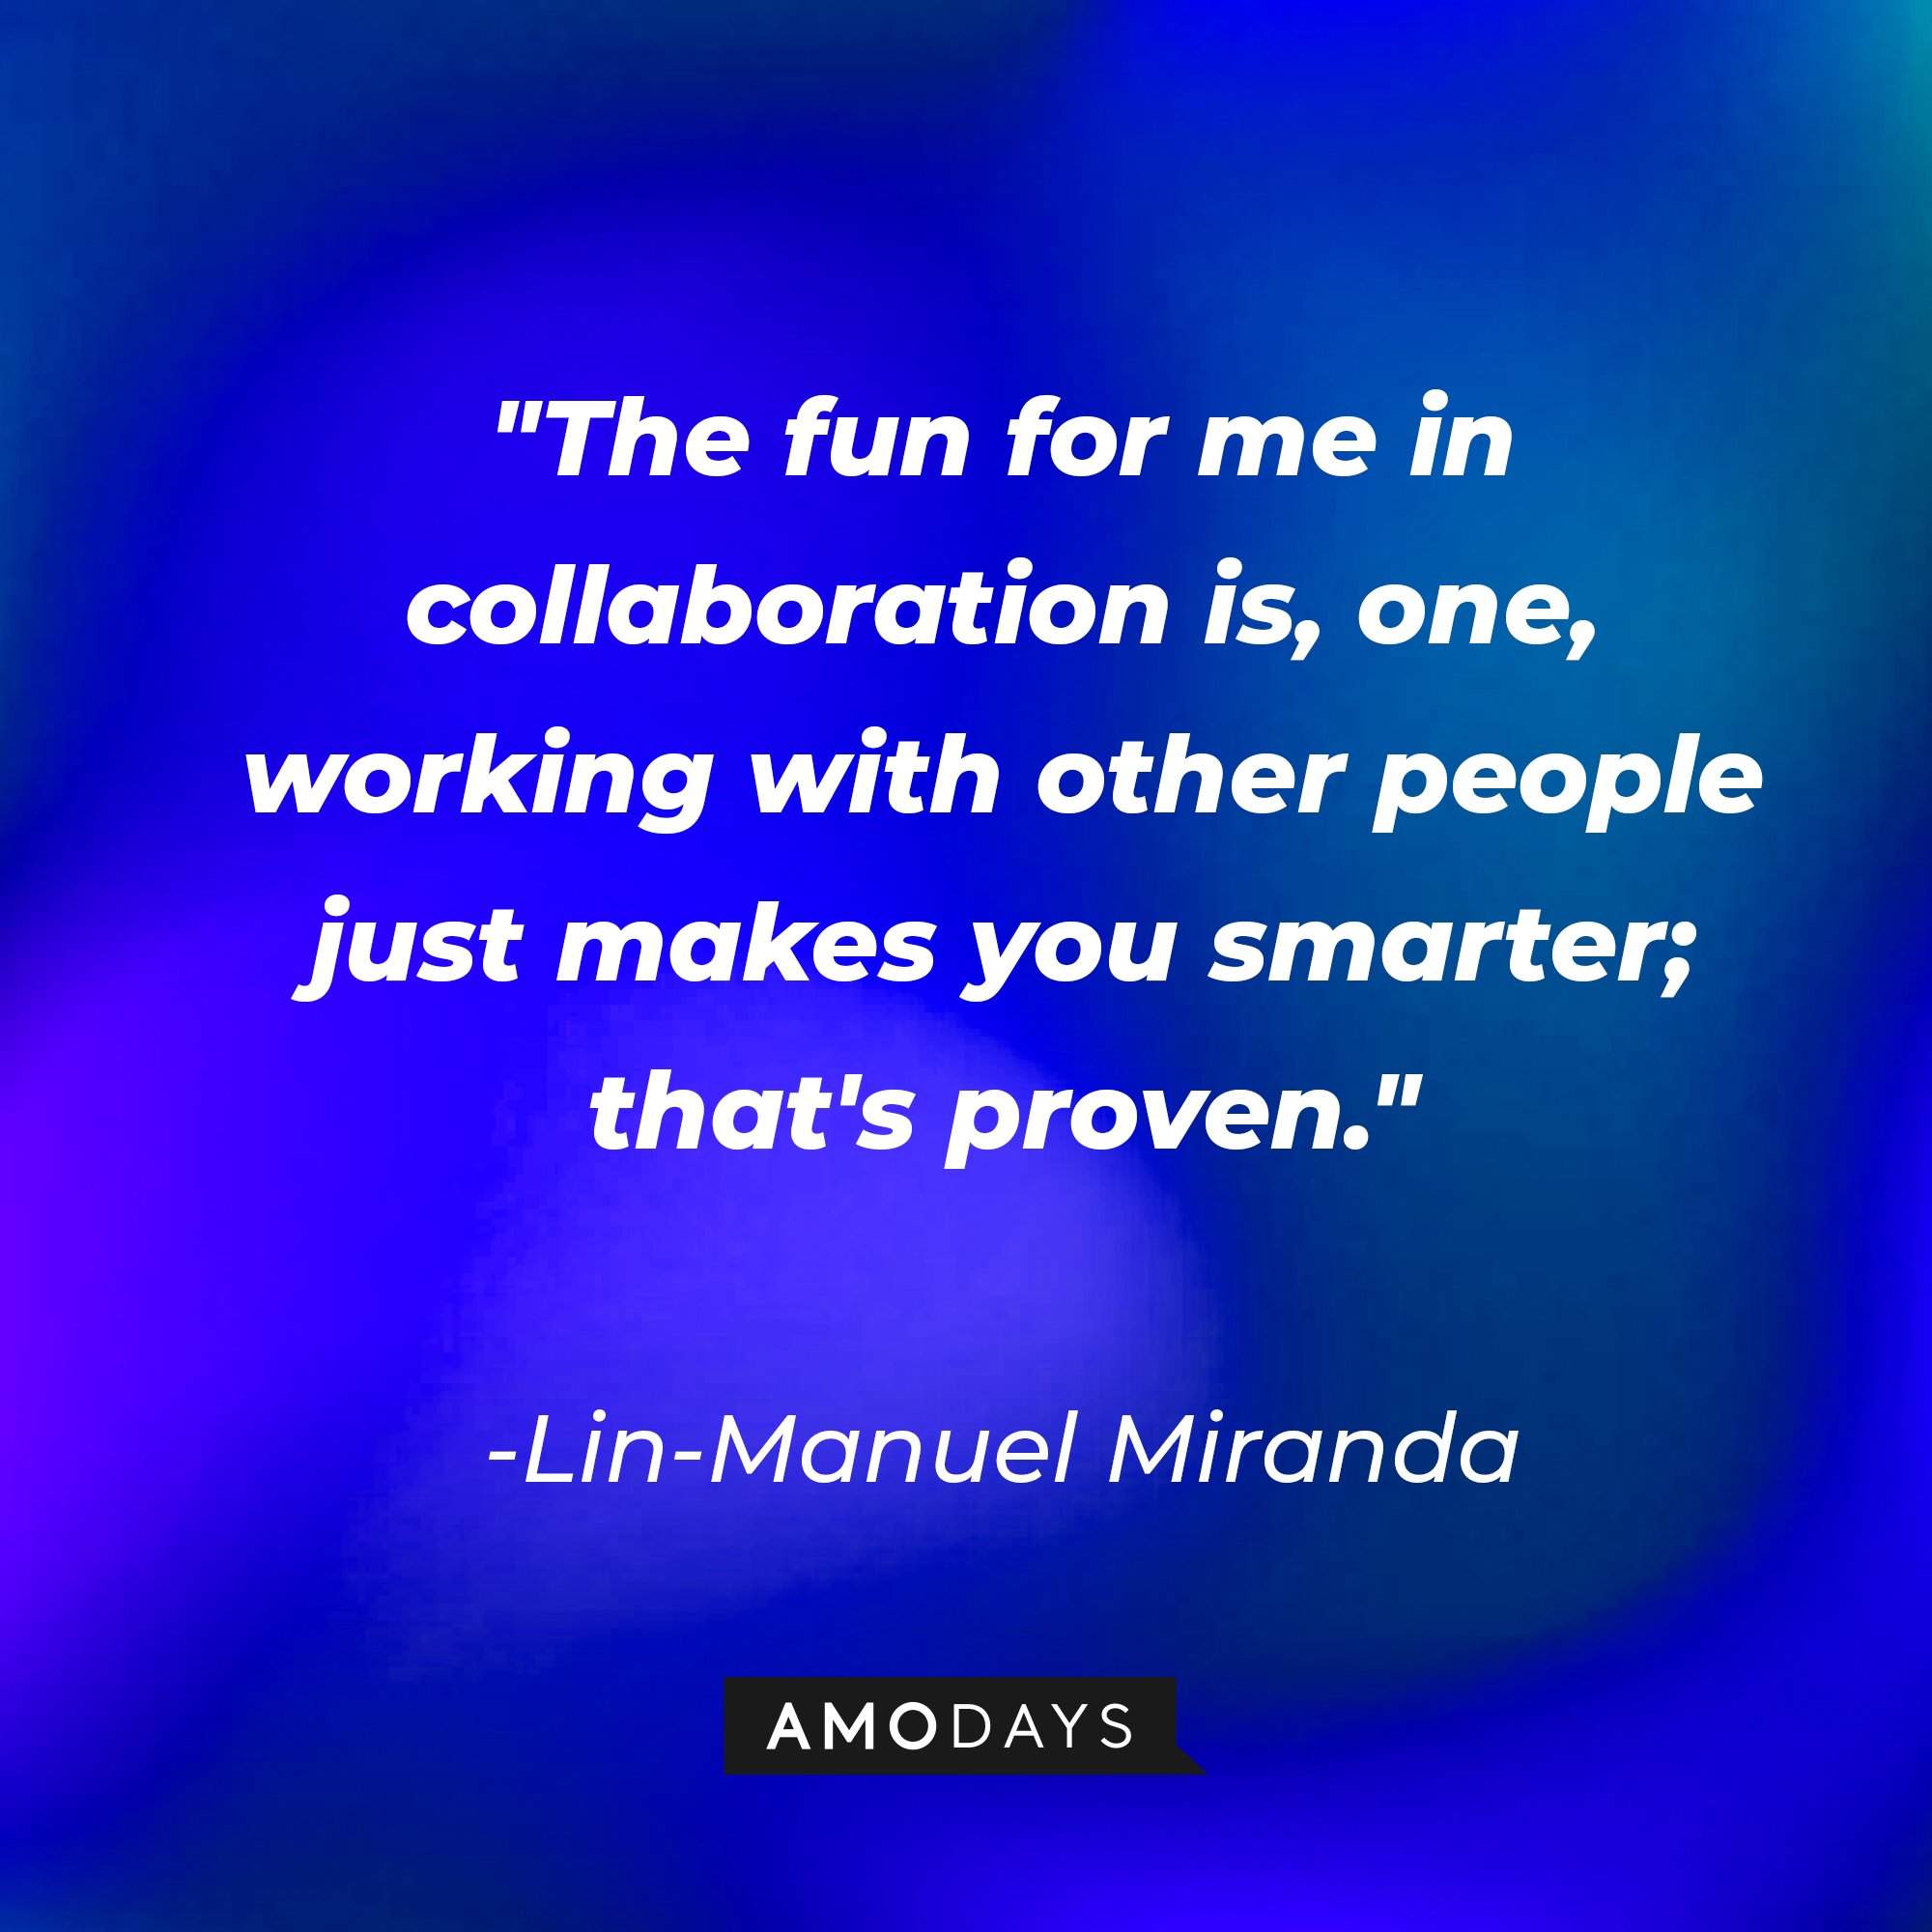 Lin-Manuel Miranda's quote: "The fun for me in collaboration is, one, working with other people just makes you smarter; that's proven." | Image: AmoDays